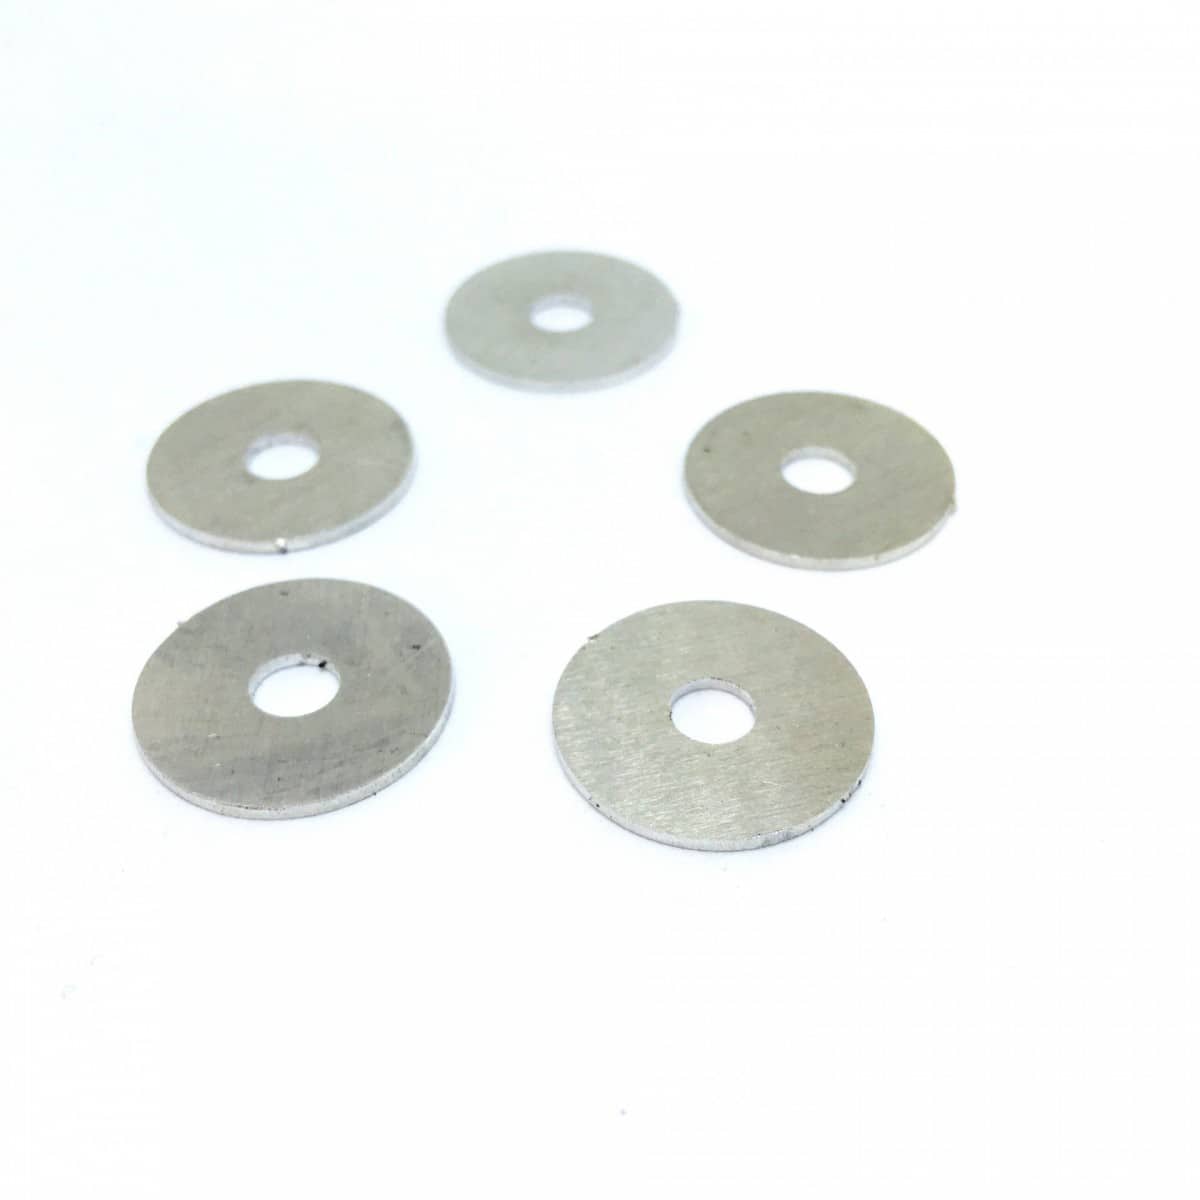 EPES Piston head AOE spacer pad 1.0mm - 5 pack